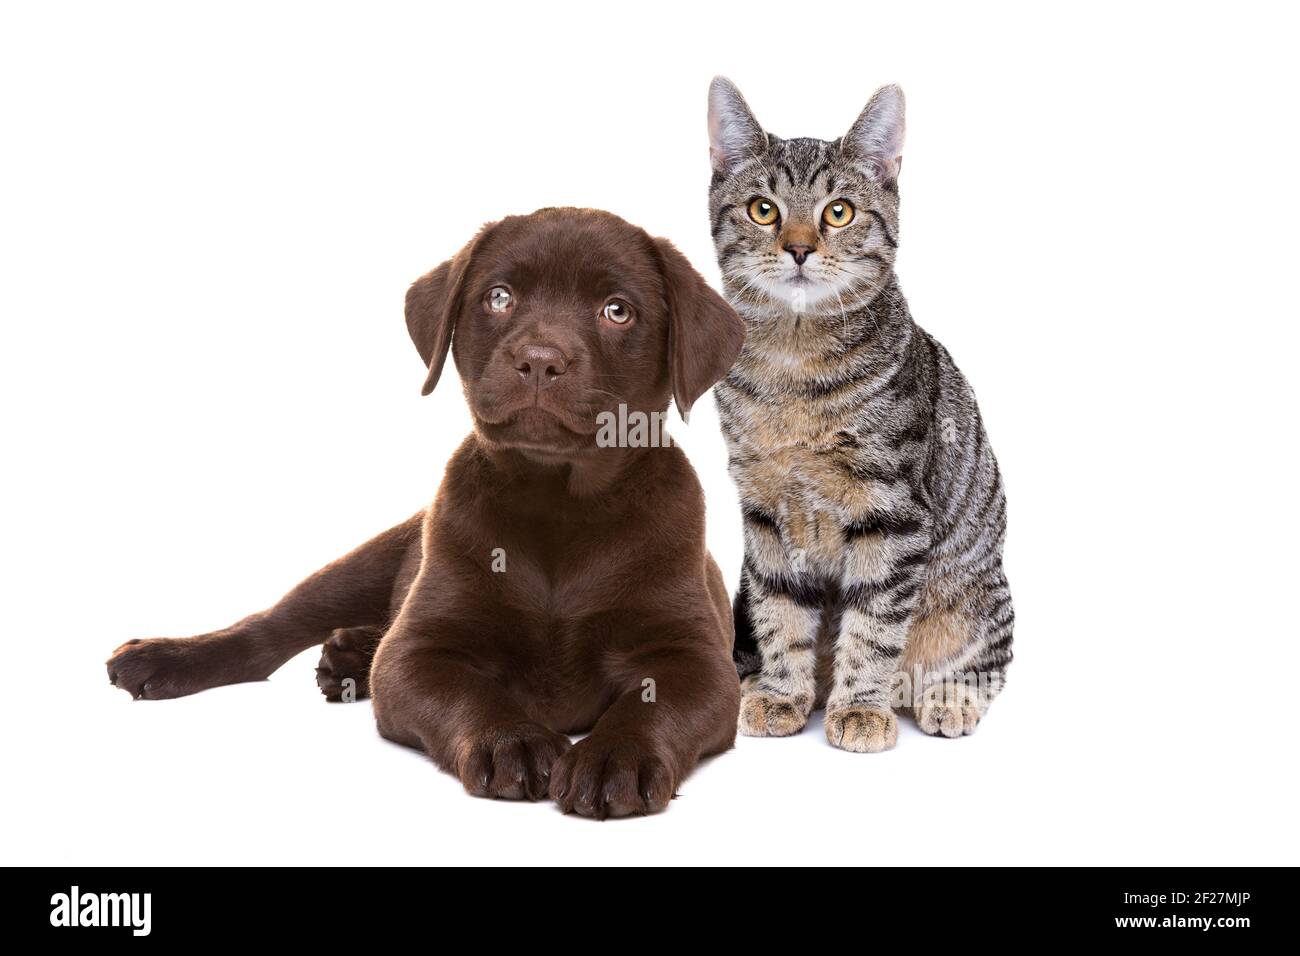 Chocolate Labrador puppy and an european short haired cat Stock Photo